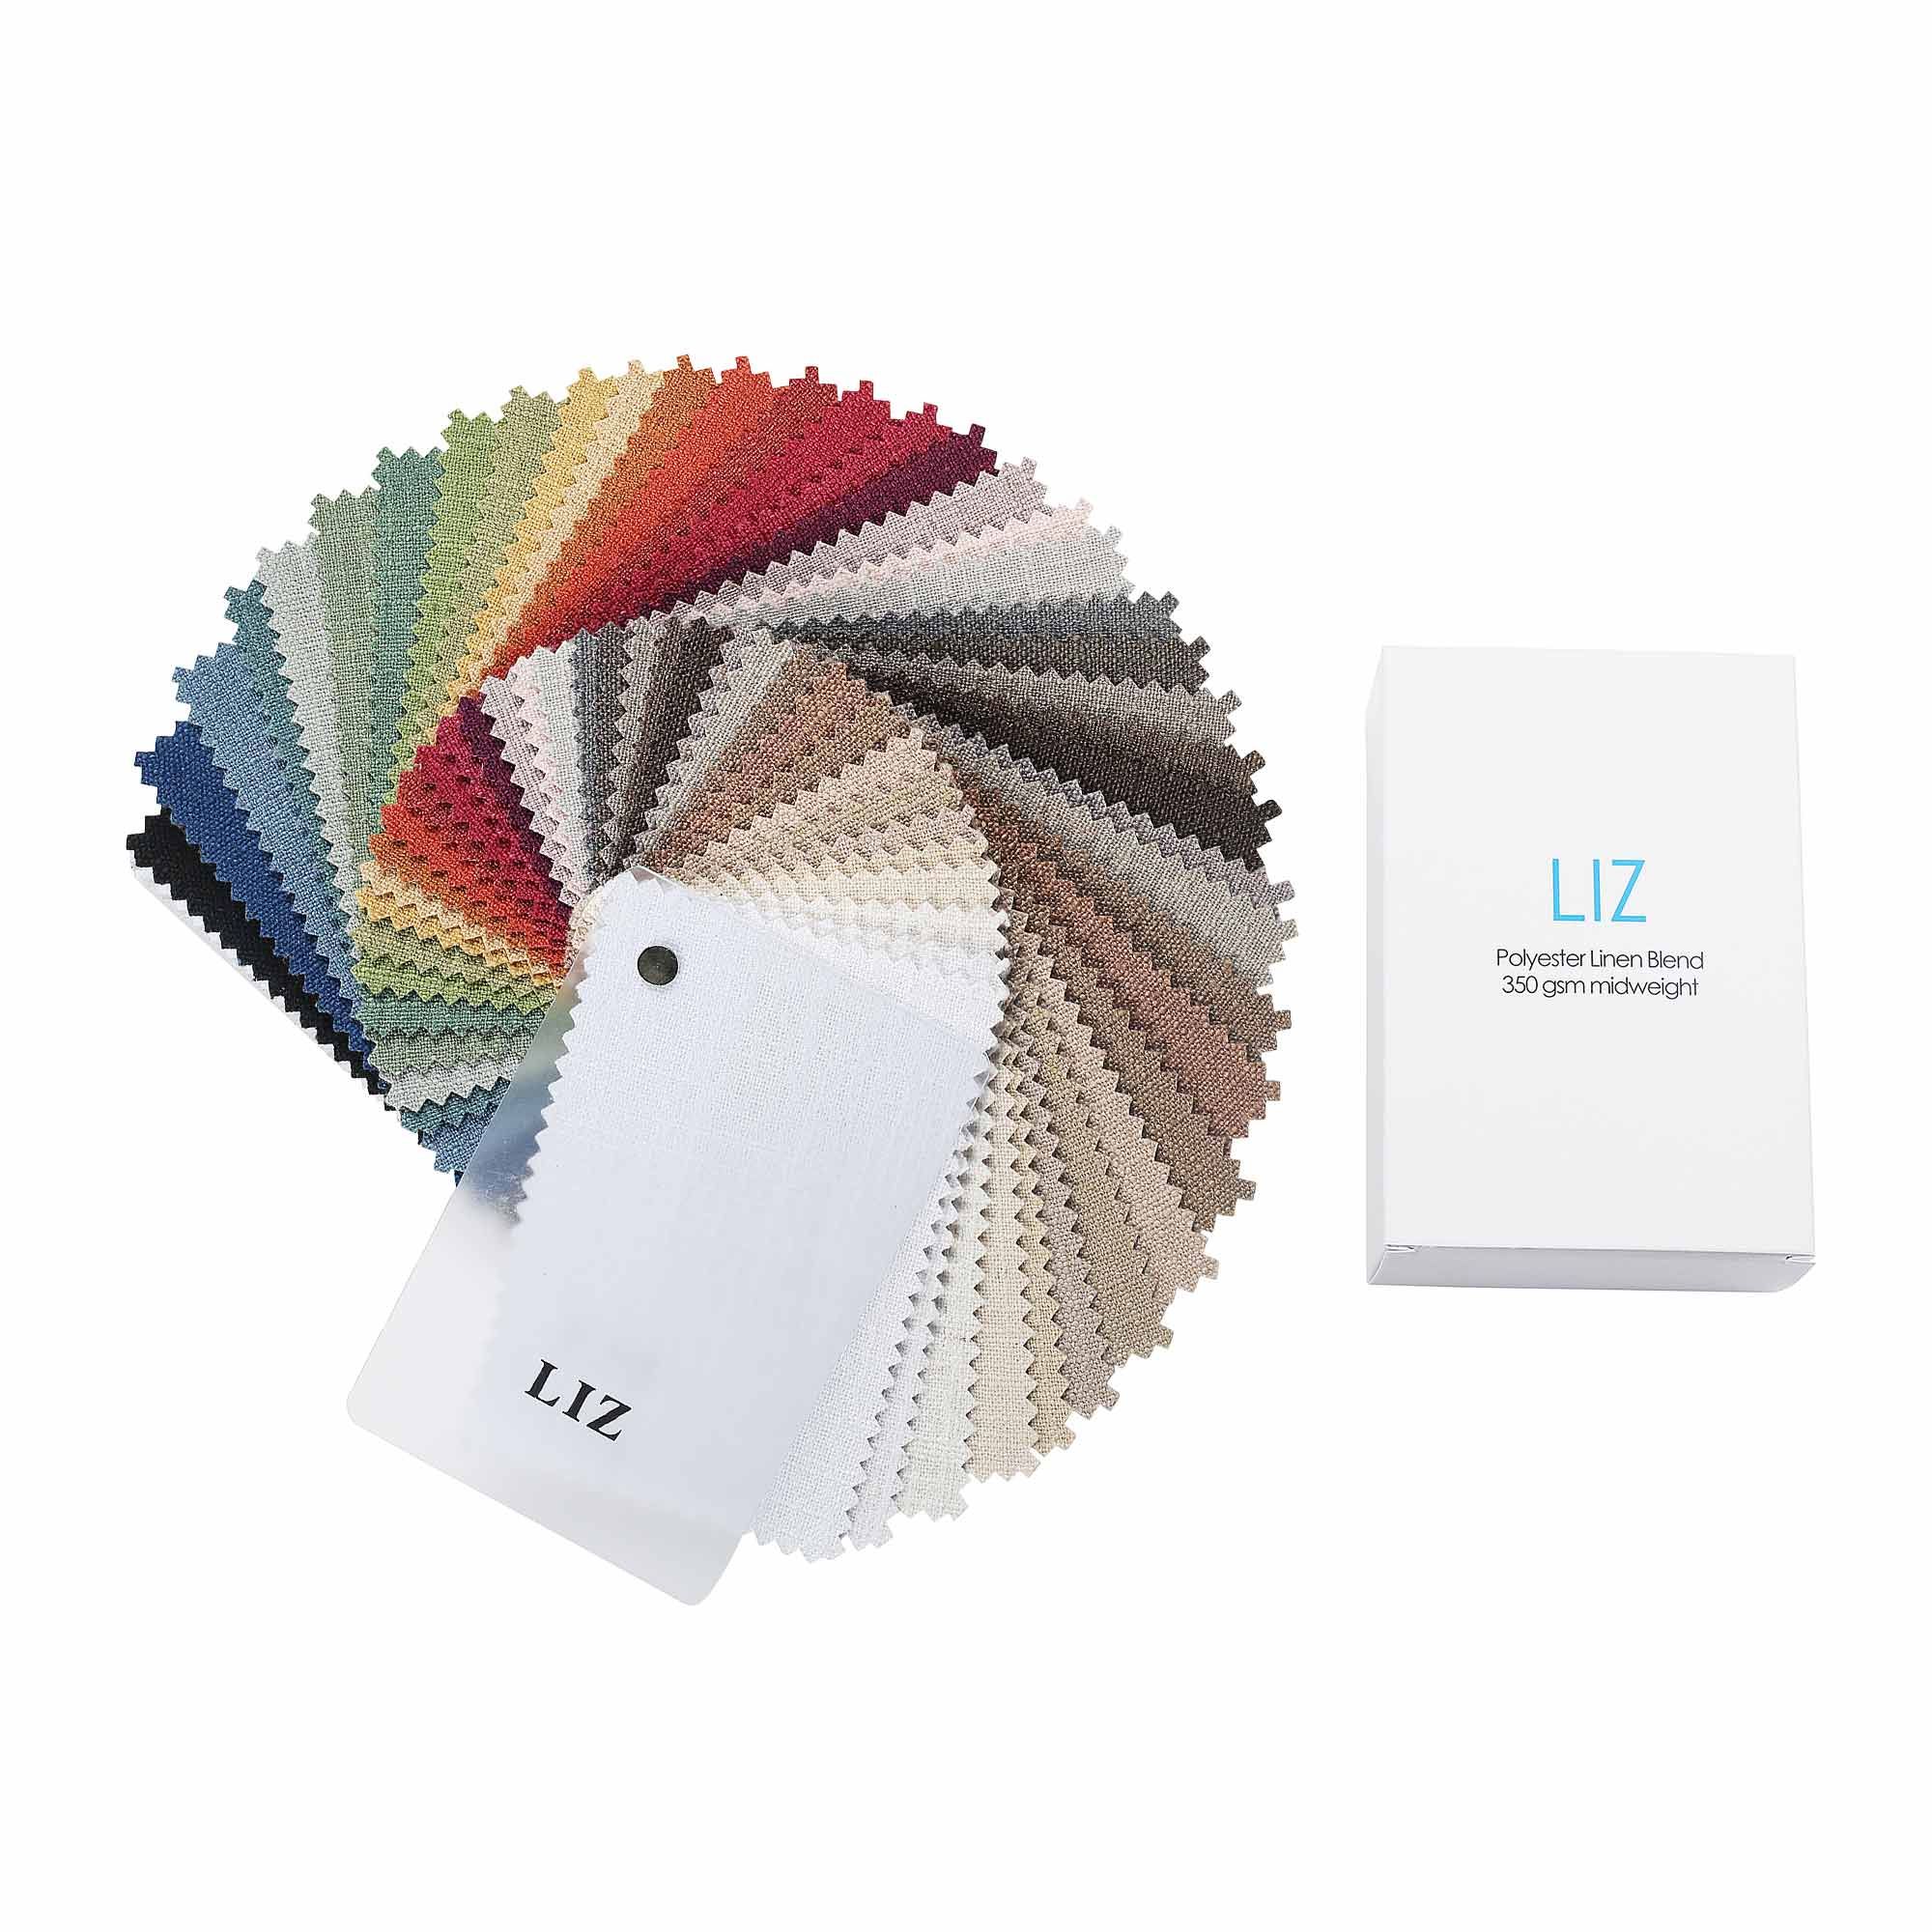 Liz Polyester Linen Sample Booklet | TWOPAGES